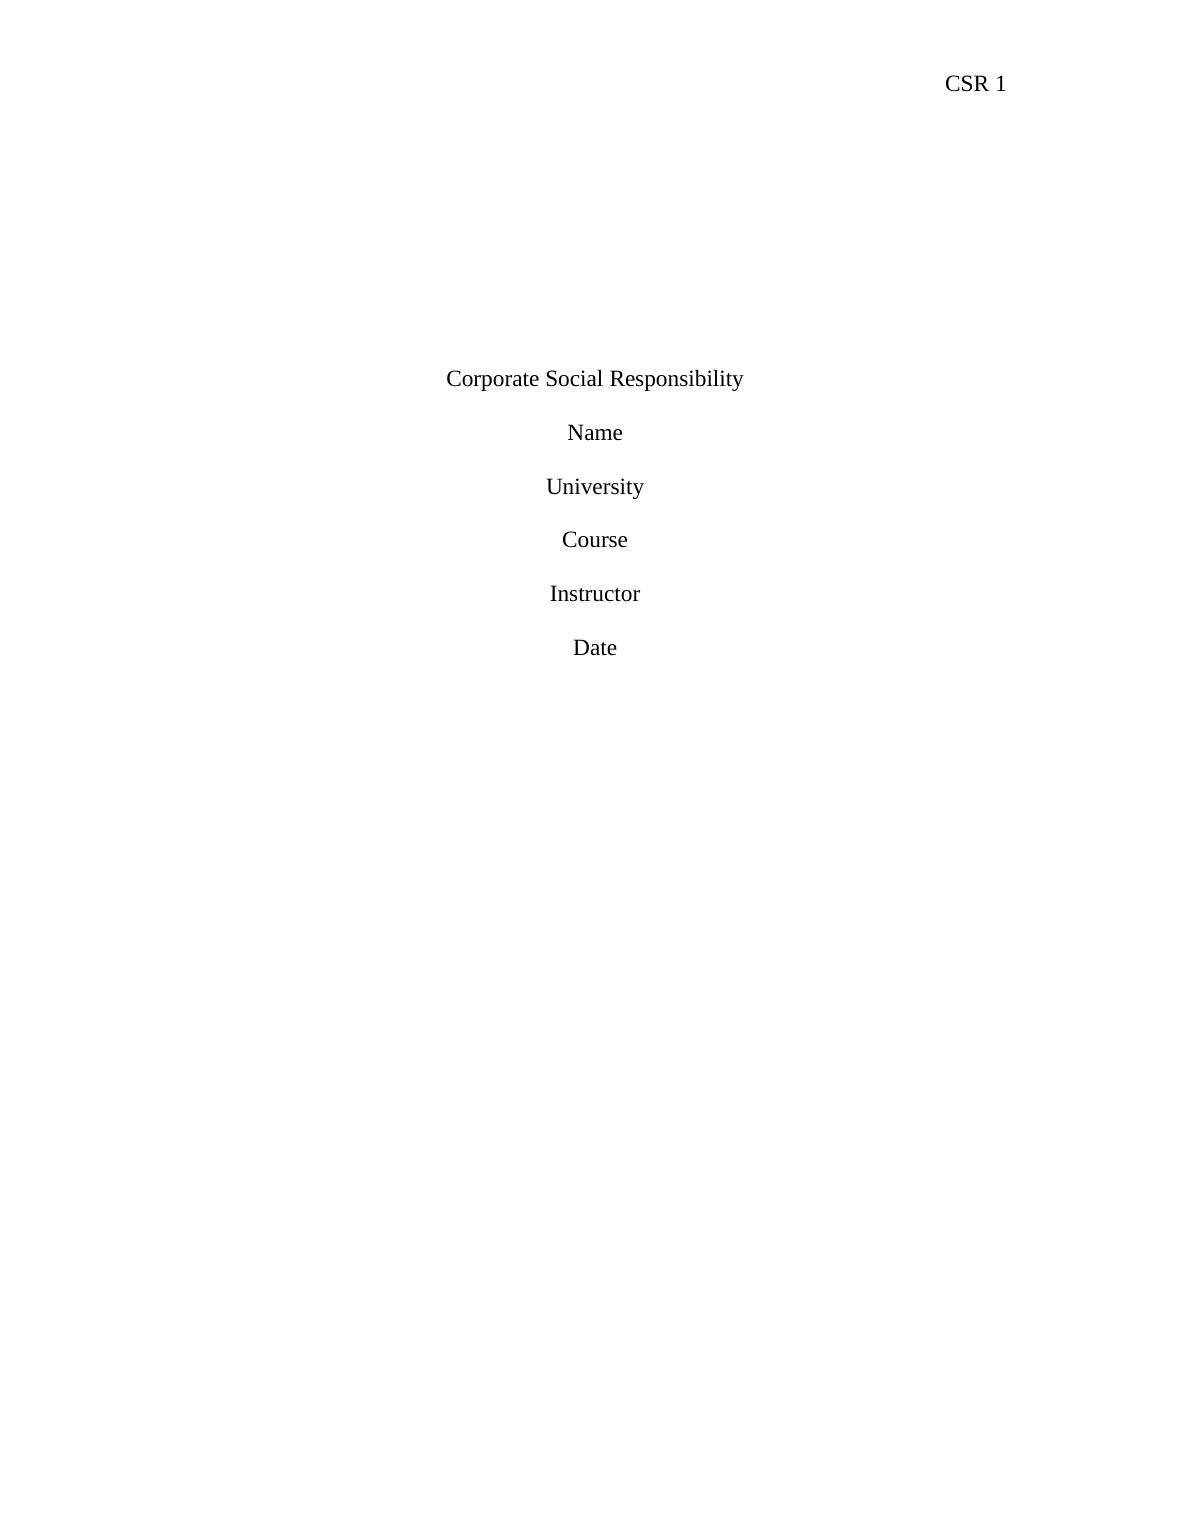 Corporate Social Responsibility  -   Assignment  Sample_1